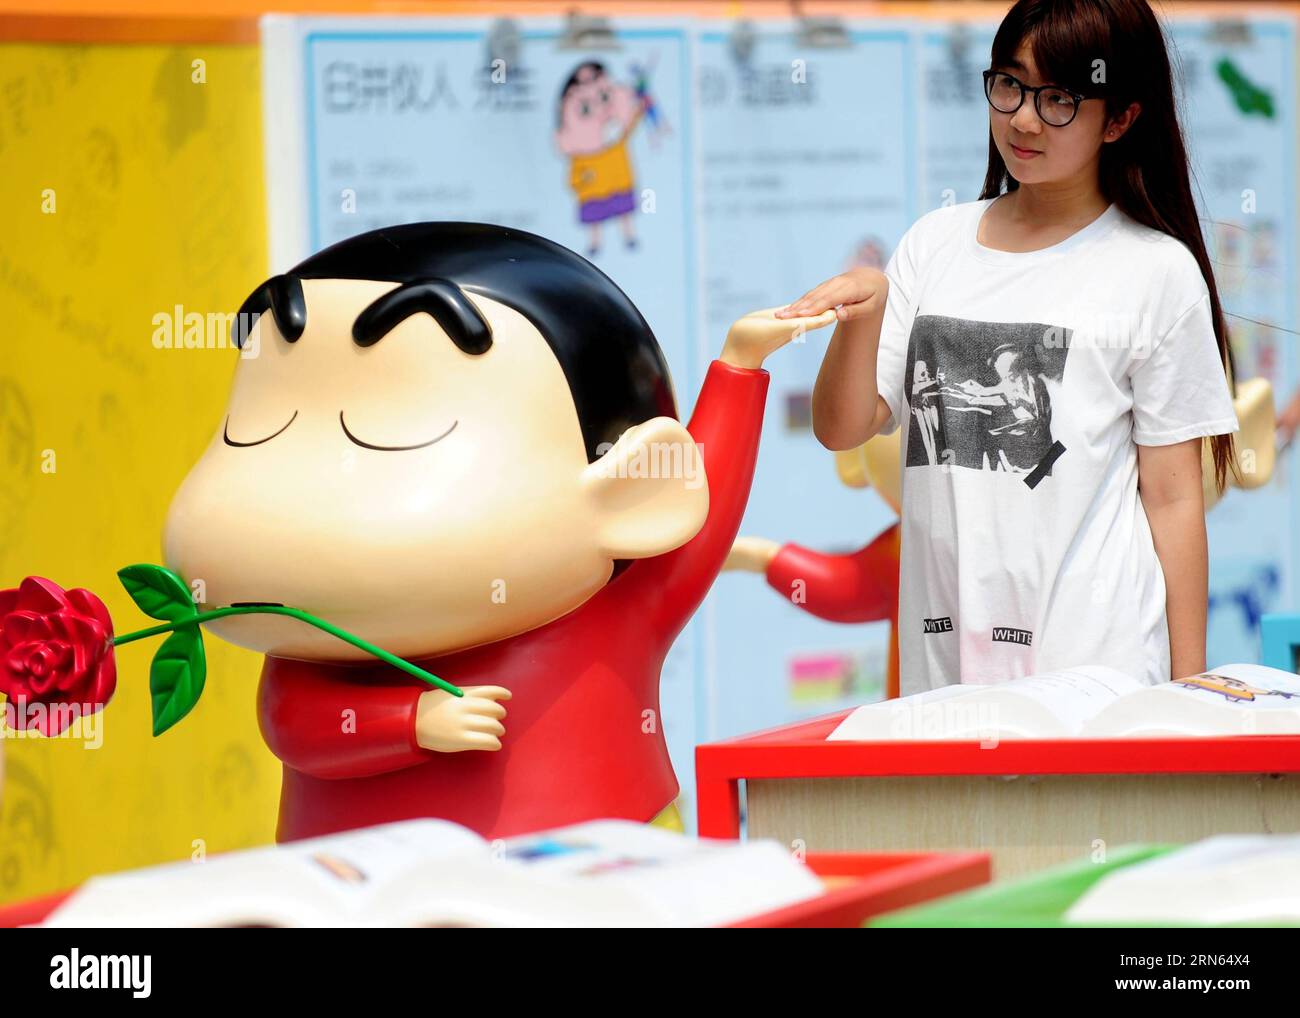 (150711) -- SHENYANG, July 11, 2015 -- A citizen visits an exhibition marking the 25th anniversary of Japanese manga series Crayon Shin-chan in Shenyang, northeast China s Liaoning Province July 11, 2015. Dozens of manga and theatrical version of Crayon Shin-chan and related figures were displayed on the exhibition that opened to public on Saturday. (mcg) CHINA-SHENYANG-CRAYON SHIN-CHAN-25TH ANNIVERSARY(CN) ZhangxWenkui PUBLICATIONxNOTxINxCHN   150 711 Shenyang July 11 2015 a Citizen visits to Exhibition marking The 25th Anniversary of Japanese Manga Series crayon Shin Chan in Shenyang Northea Stock Photo